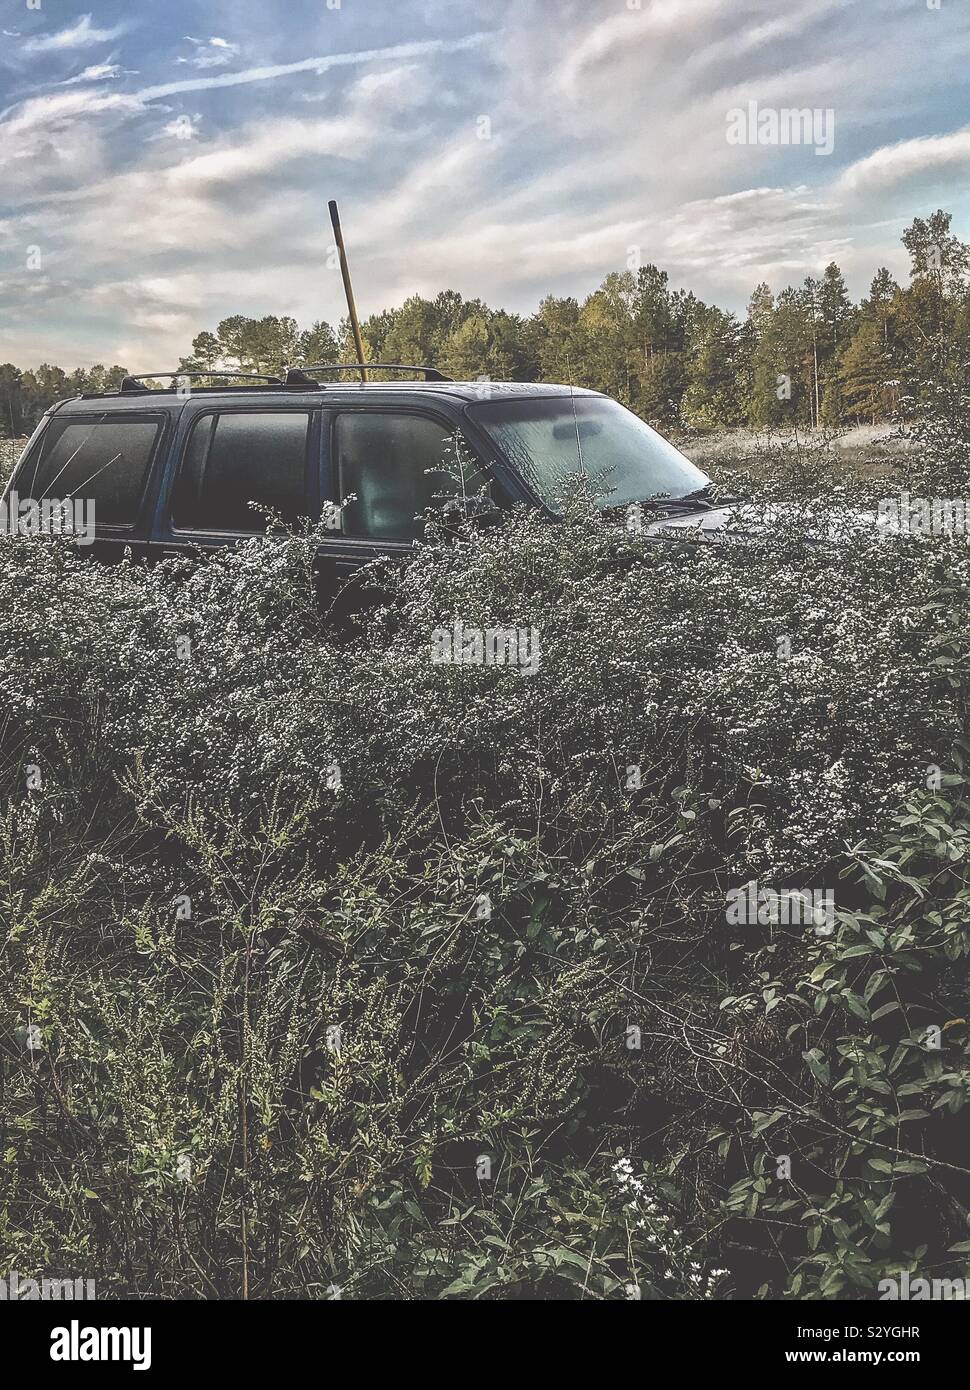 Green SUV surrounded by encroaching Aster pilosus blossoms in October field Stock Photo